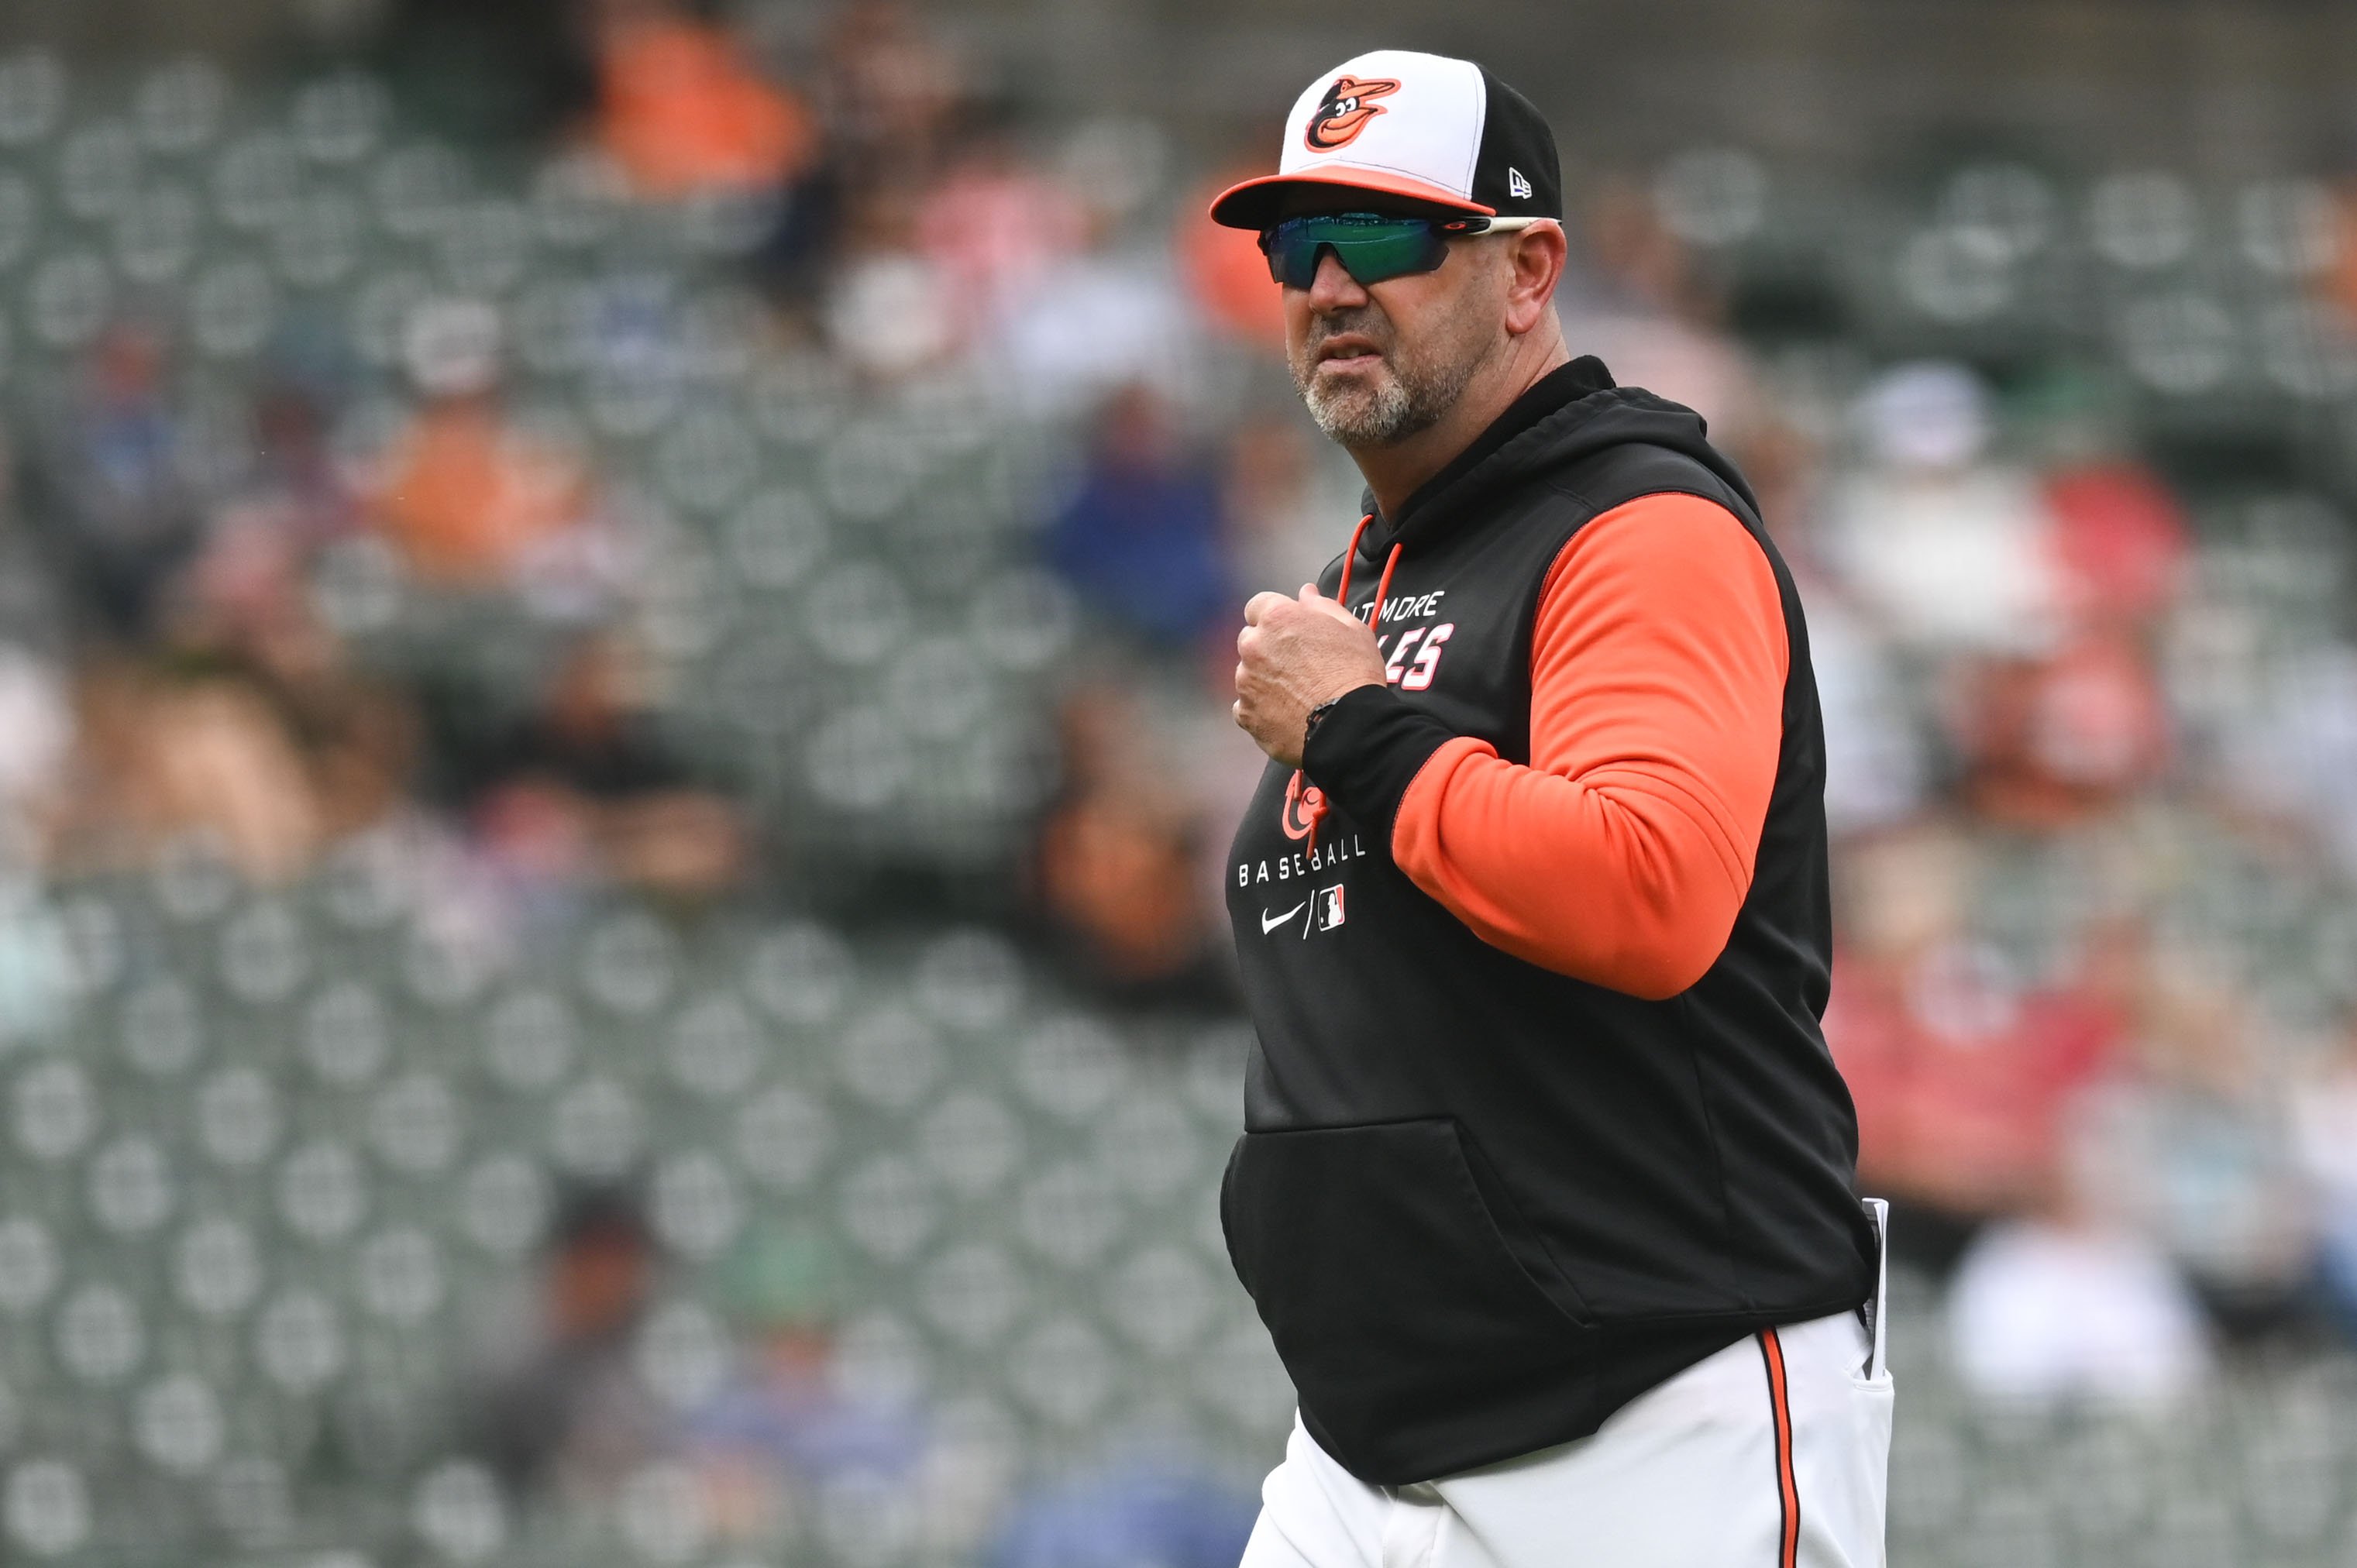 2023 MLB Futures: Best Bets For Baltimore Orioles